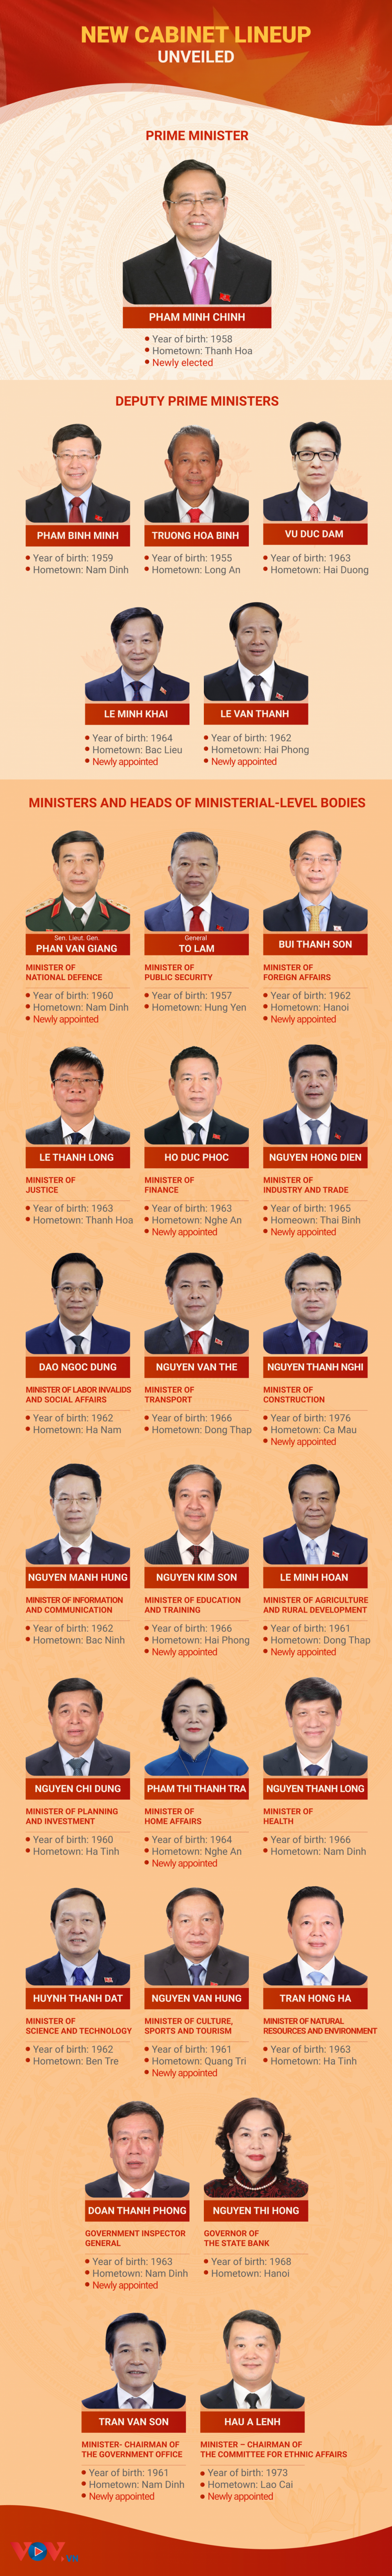 New Cabinet lineup unveiled on April 8